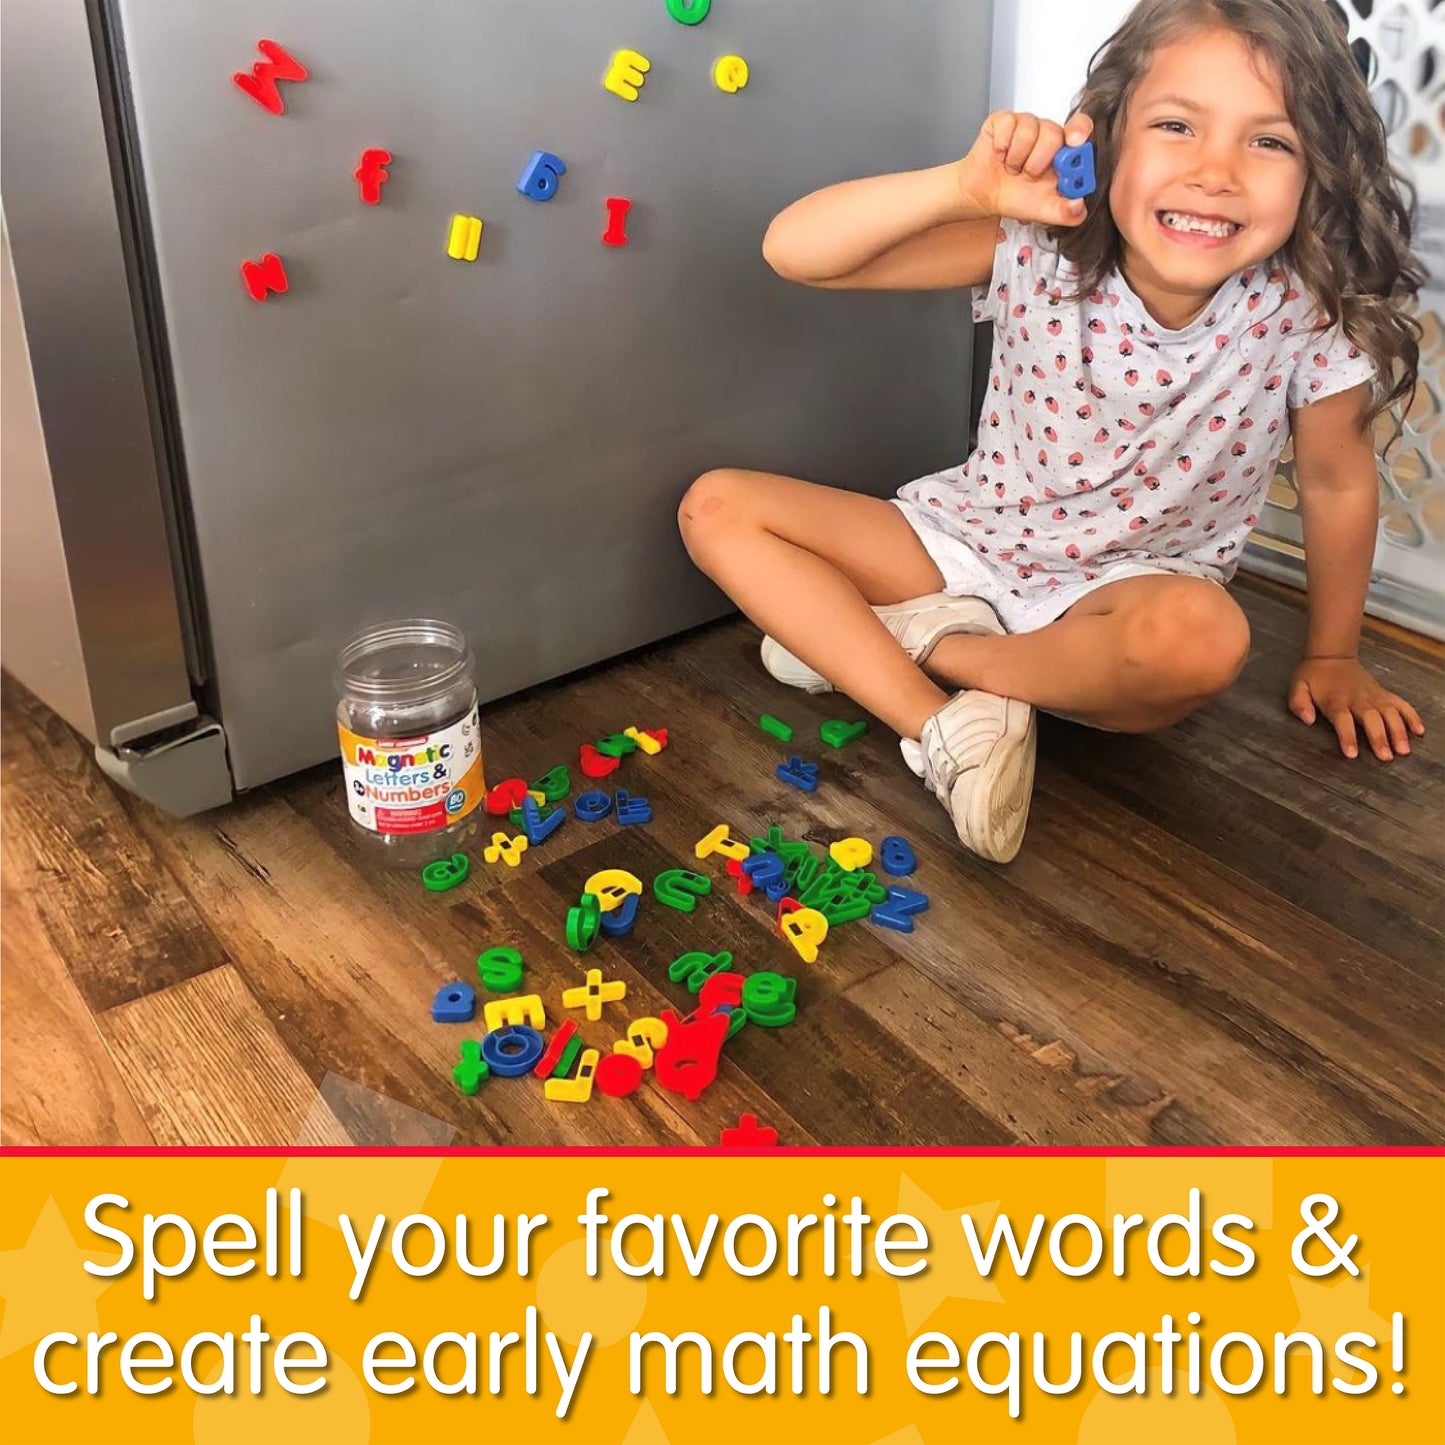 Infographic of little girl playing with Magnetic Letters and Numbers that says, "Spell your favorite words and create early math equations!"